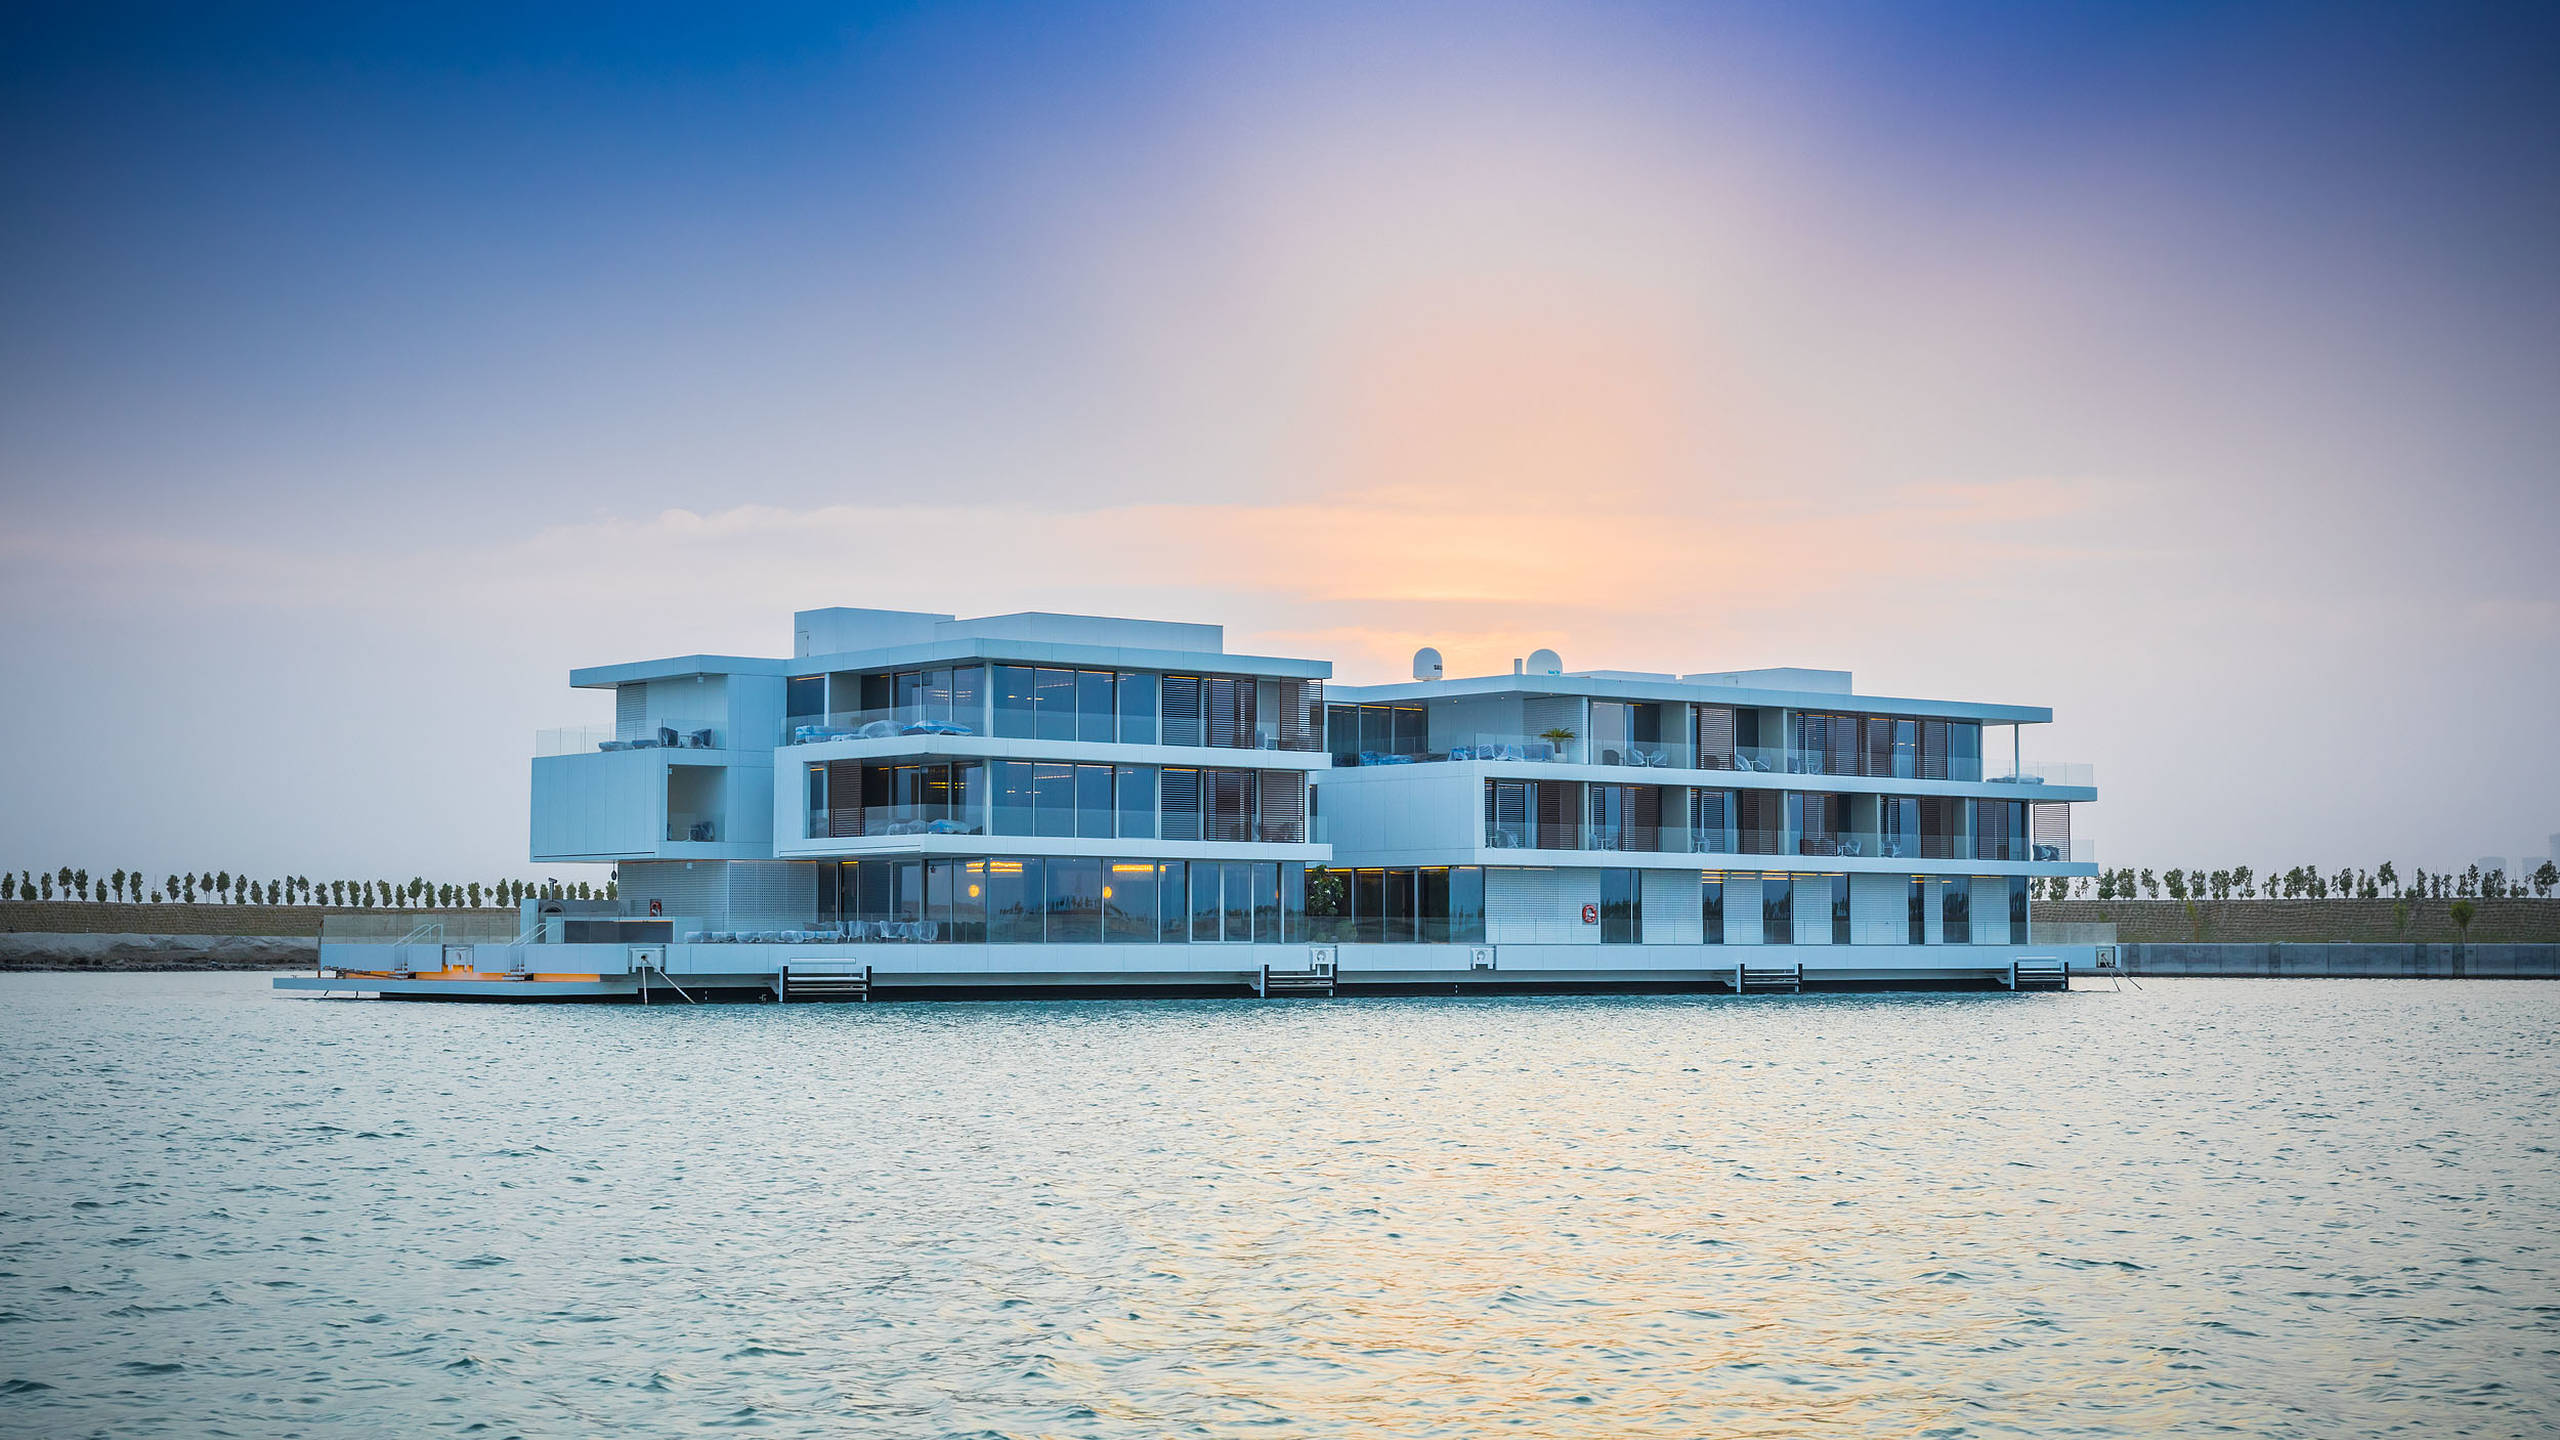 The World’s largest floating villa is now operating autonomously